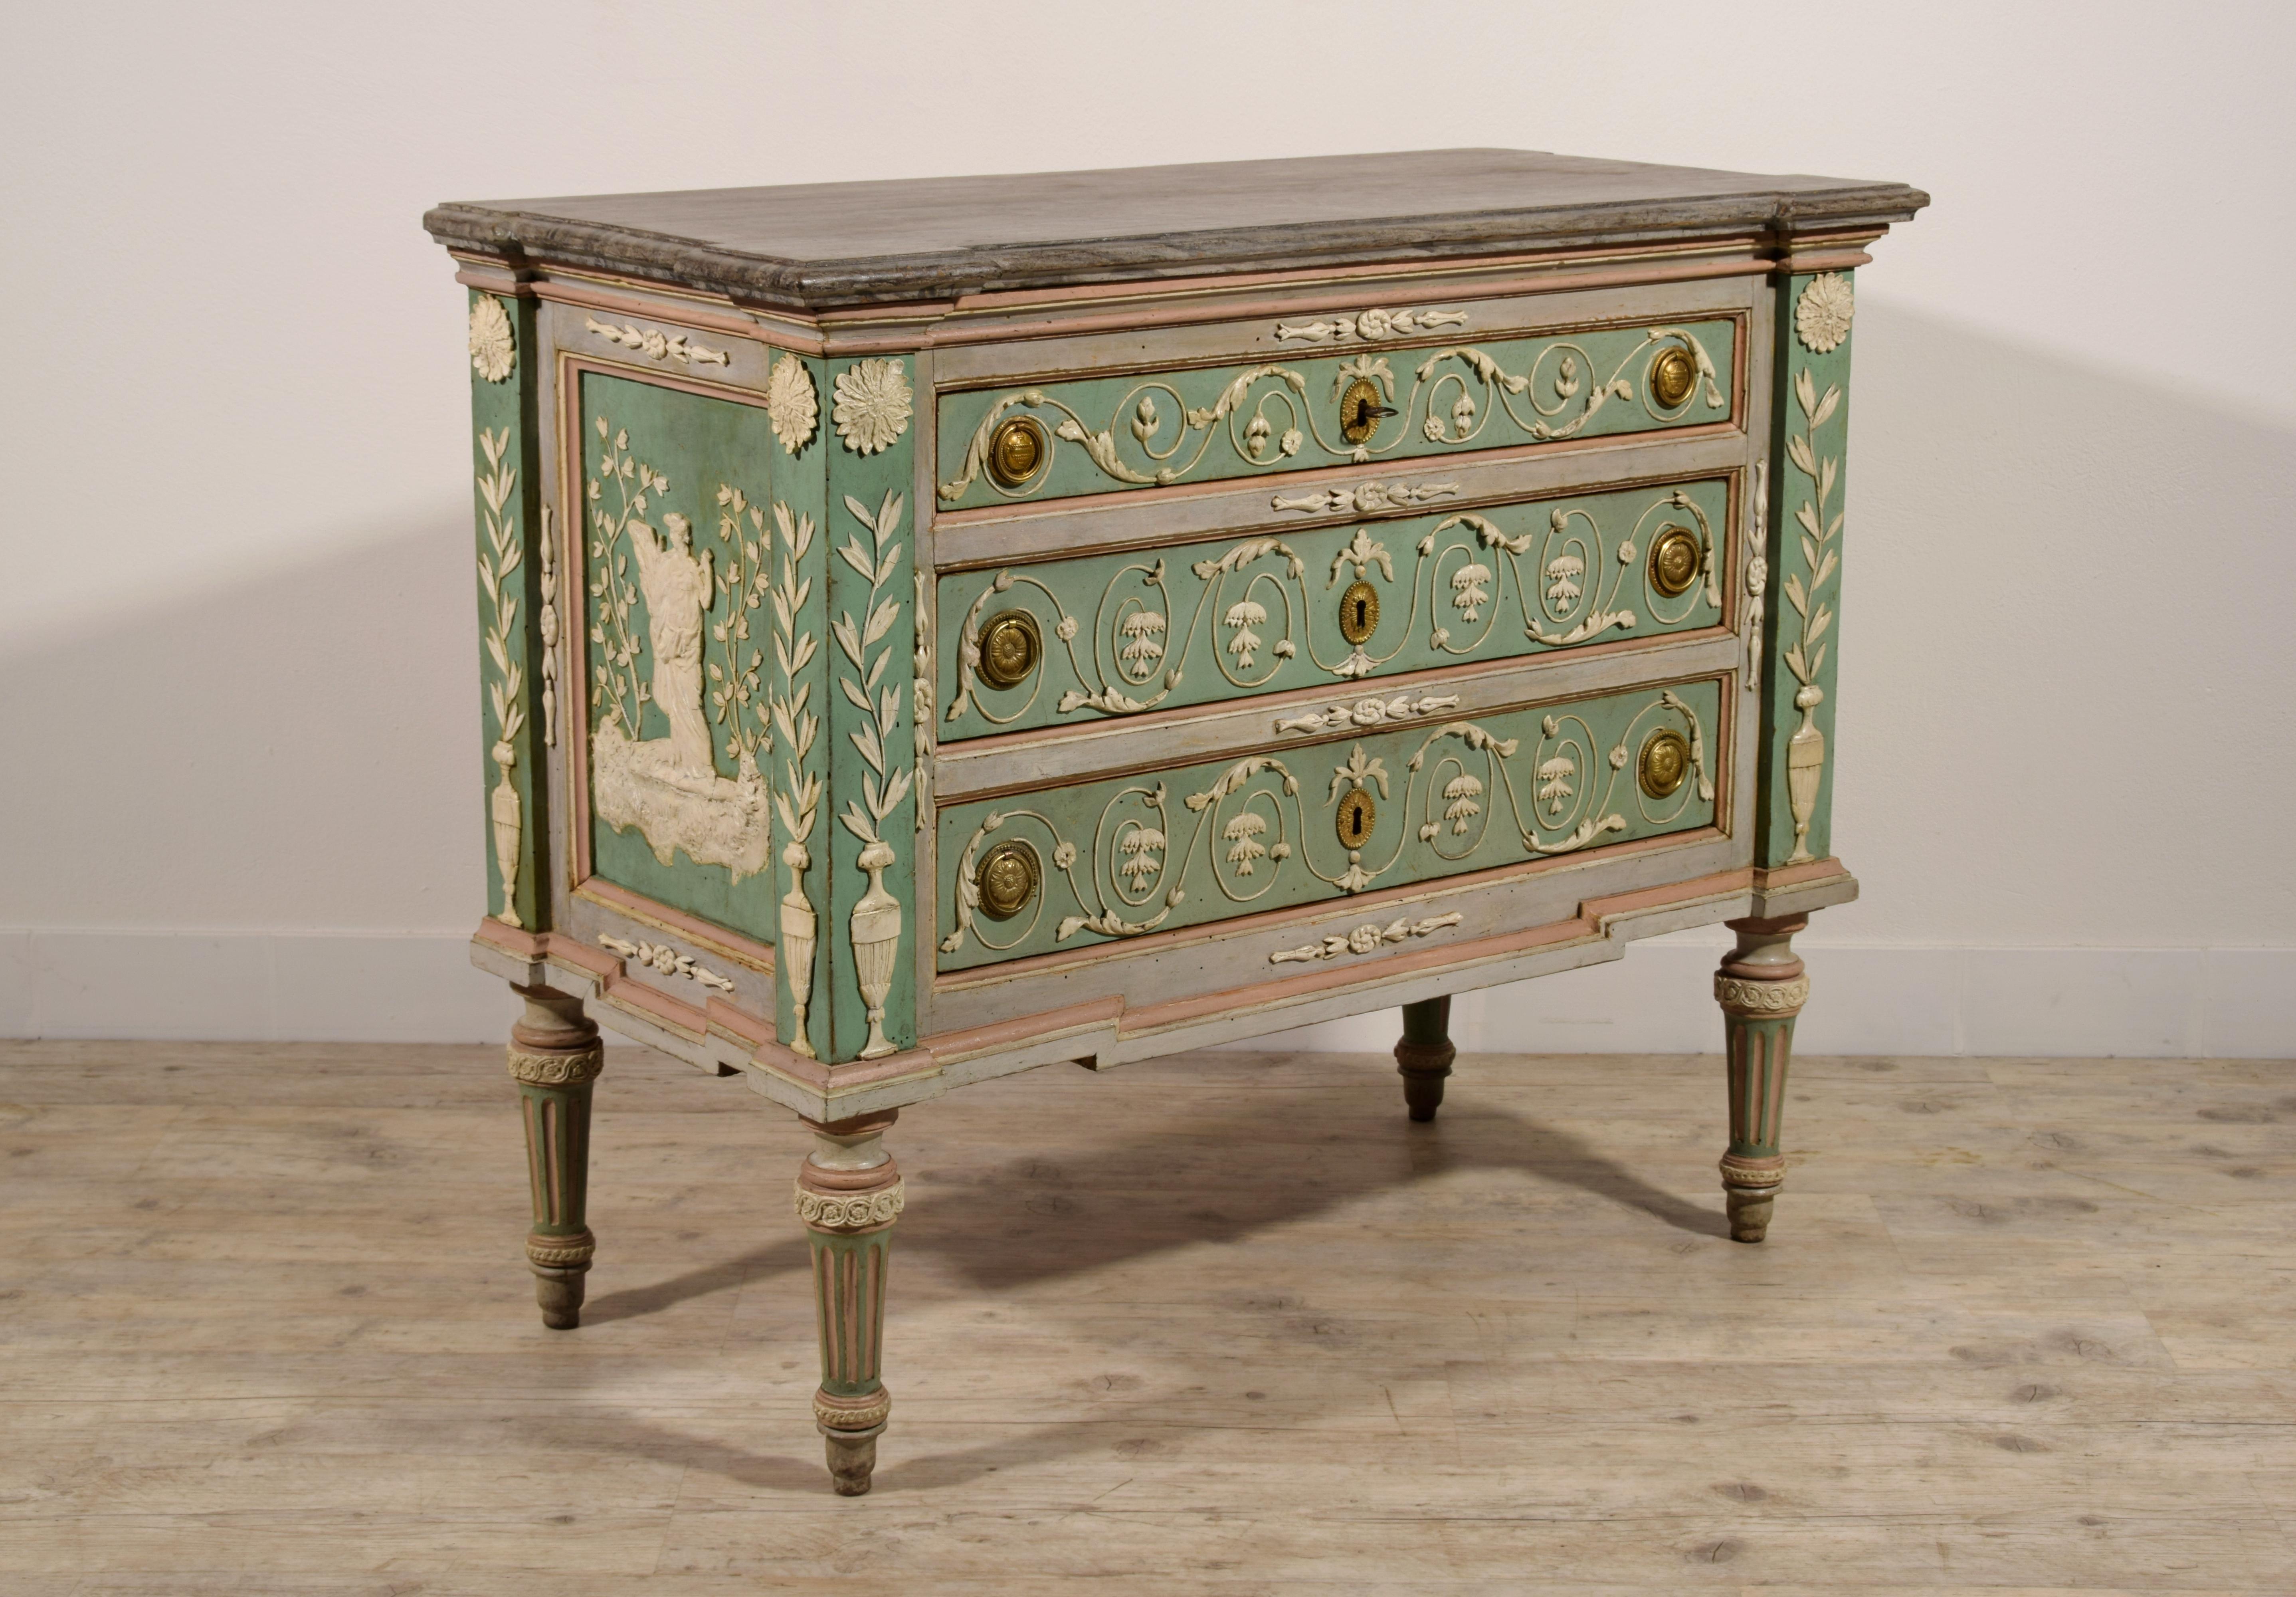 18th century, Italian Lacquered wood chest of drawers

This refined neoclassical chest of drawers was made in Turin, Italy, towards the end of the 18th century. Entirely lacquered, it is decorated with reliefs and pad applications. Tablet means a